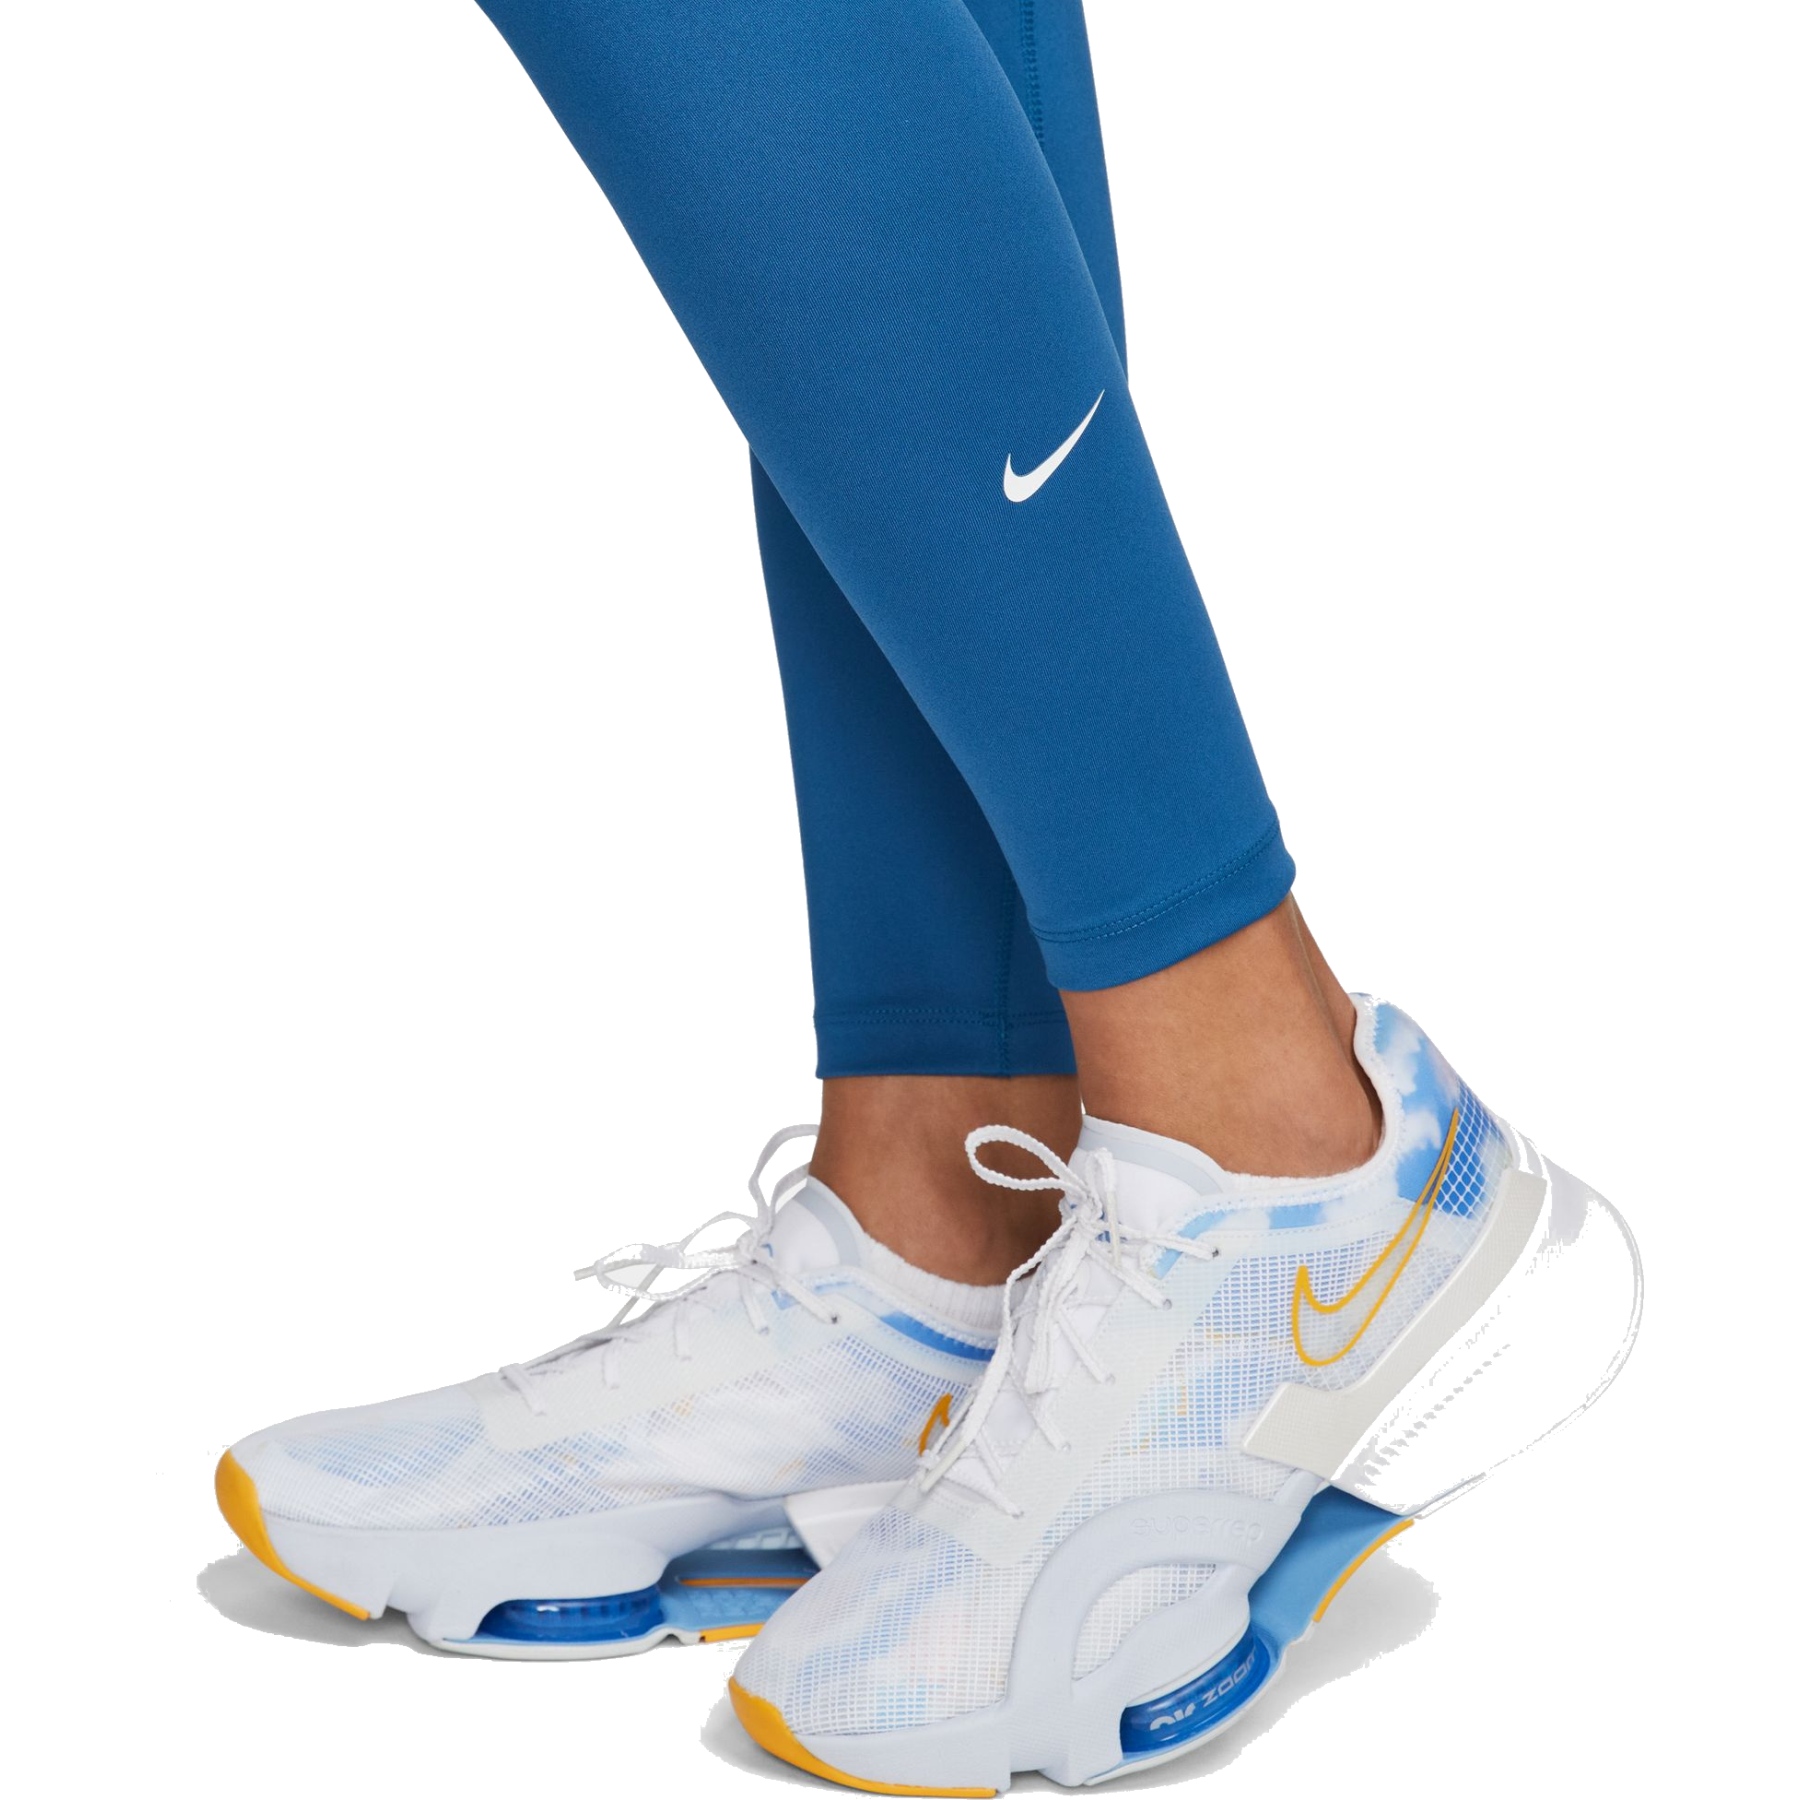 Nike One Training Dri Fit High Rise Cropped Leggings In Diffused Blue, DM7276-491